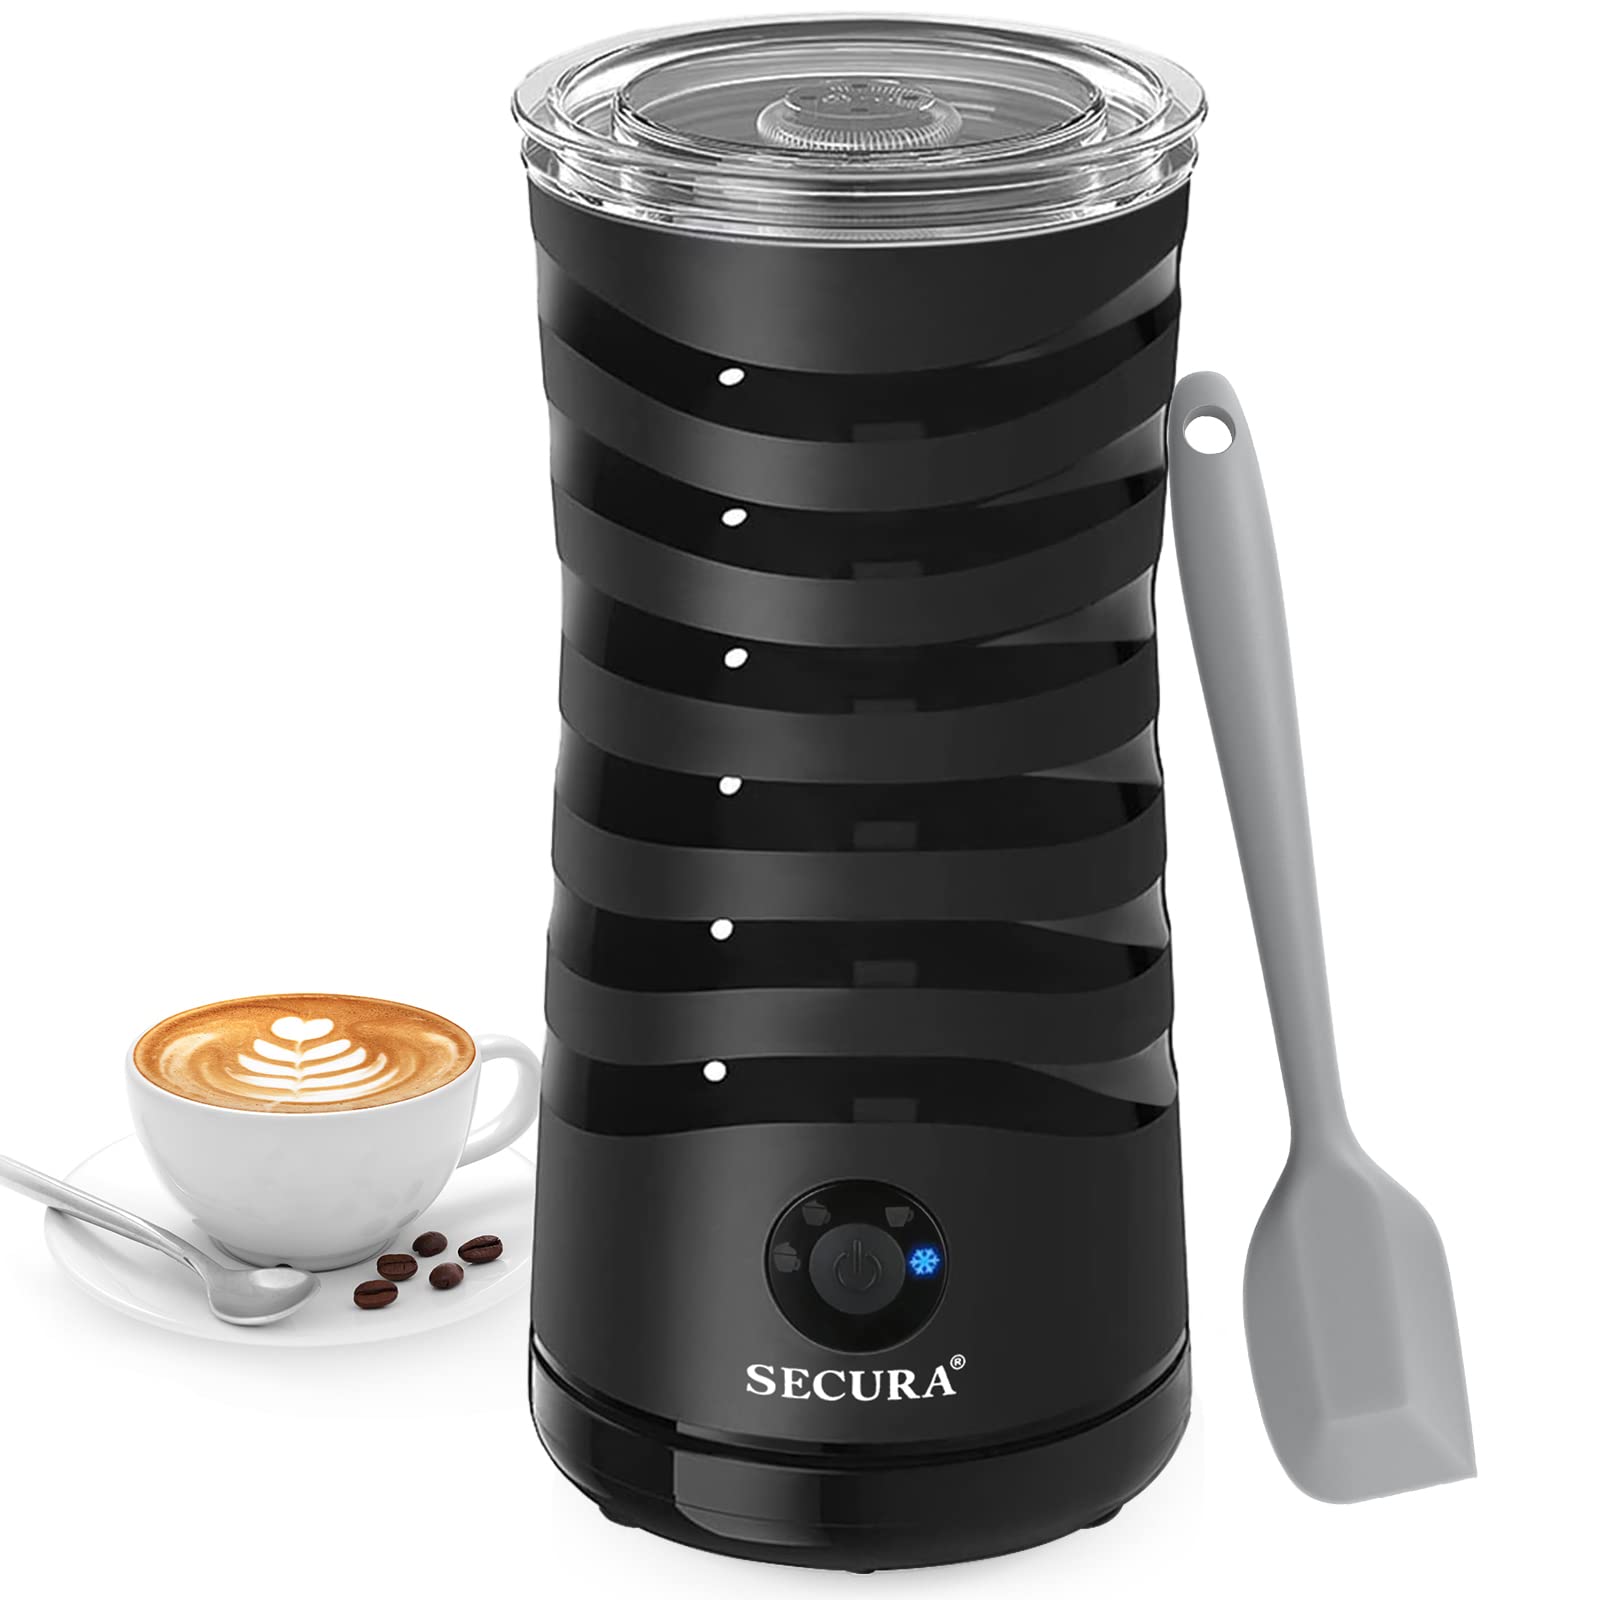 Secura Electrical Milk Frother, Automatic Milk Steamer, 4-IN-1 Sizzling & Chilly Foam Maker-8.4oz/240ml Milk Hotter for Latte, Cappuccinos, Macchiato with Silicone Spatula, Silent Working & Automatic off.